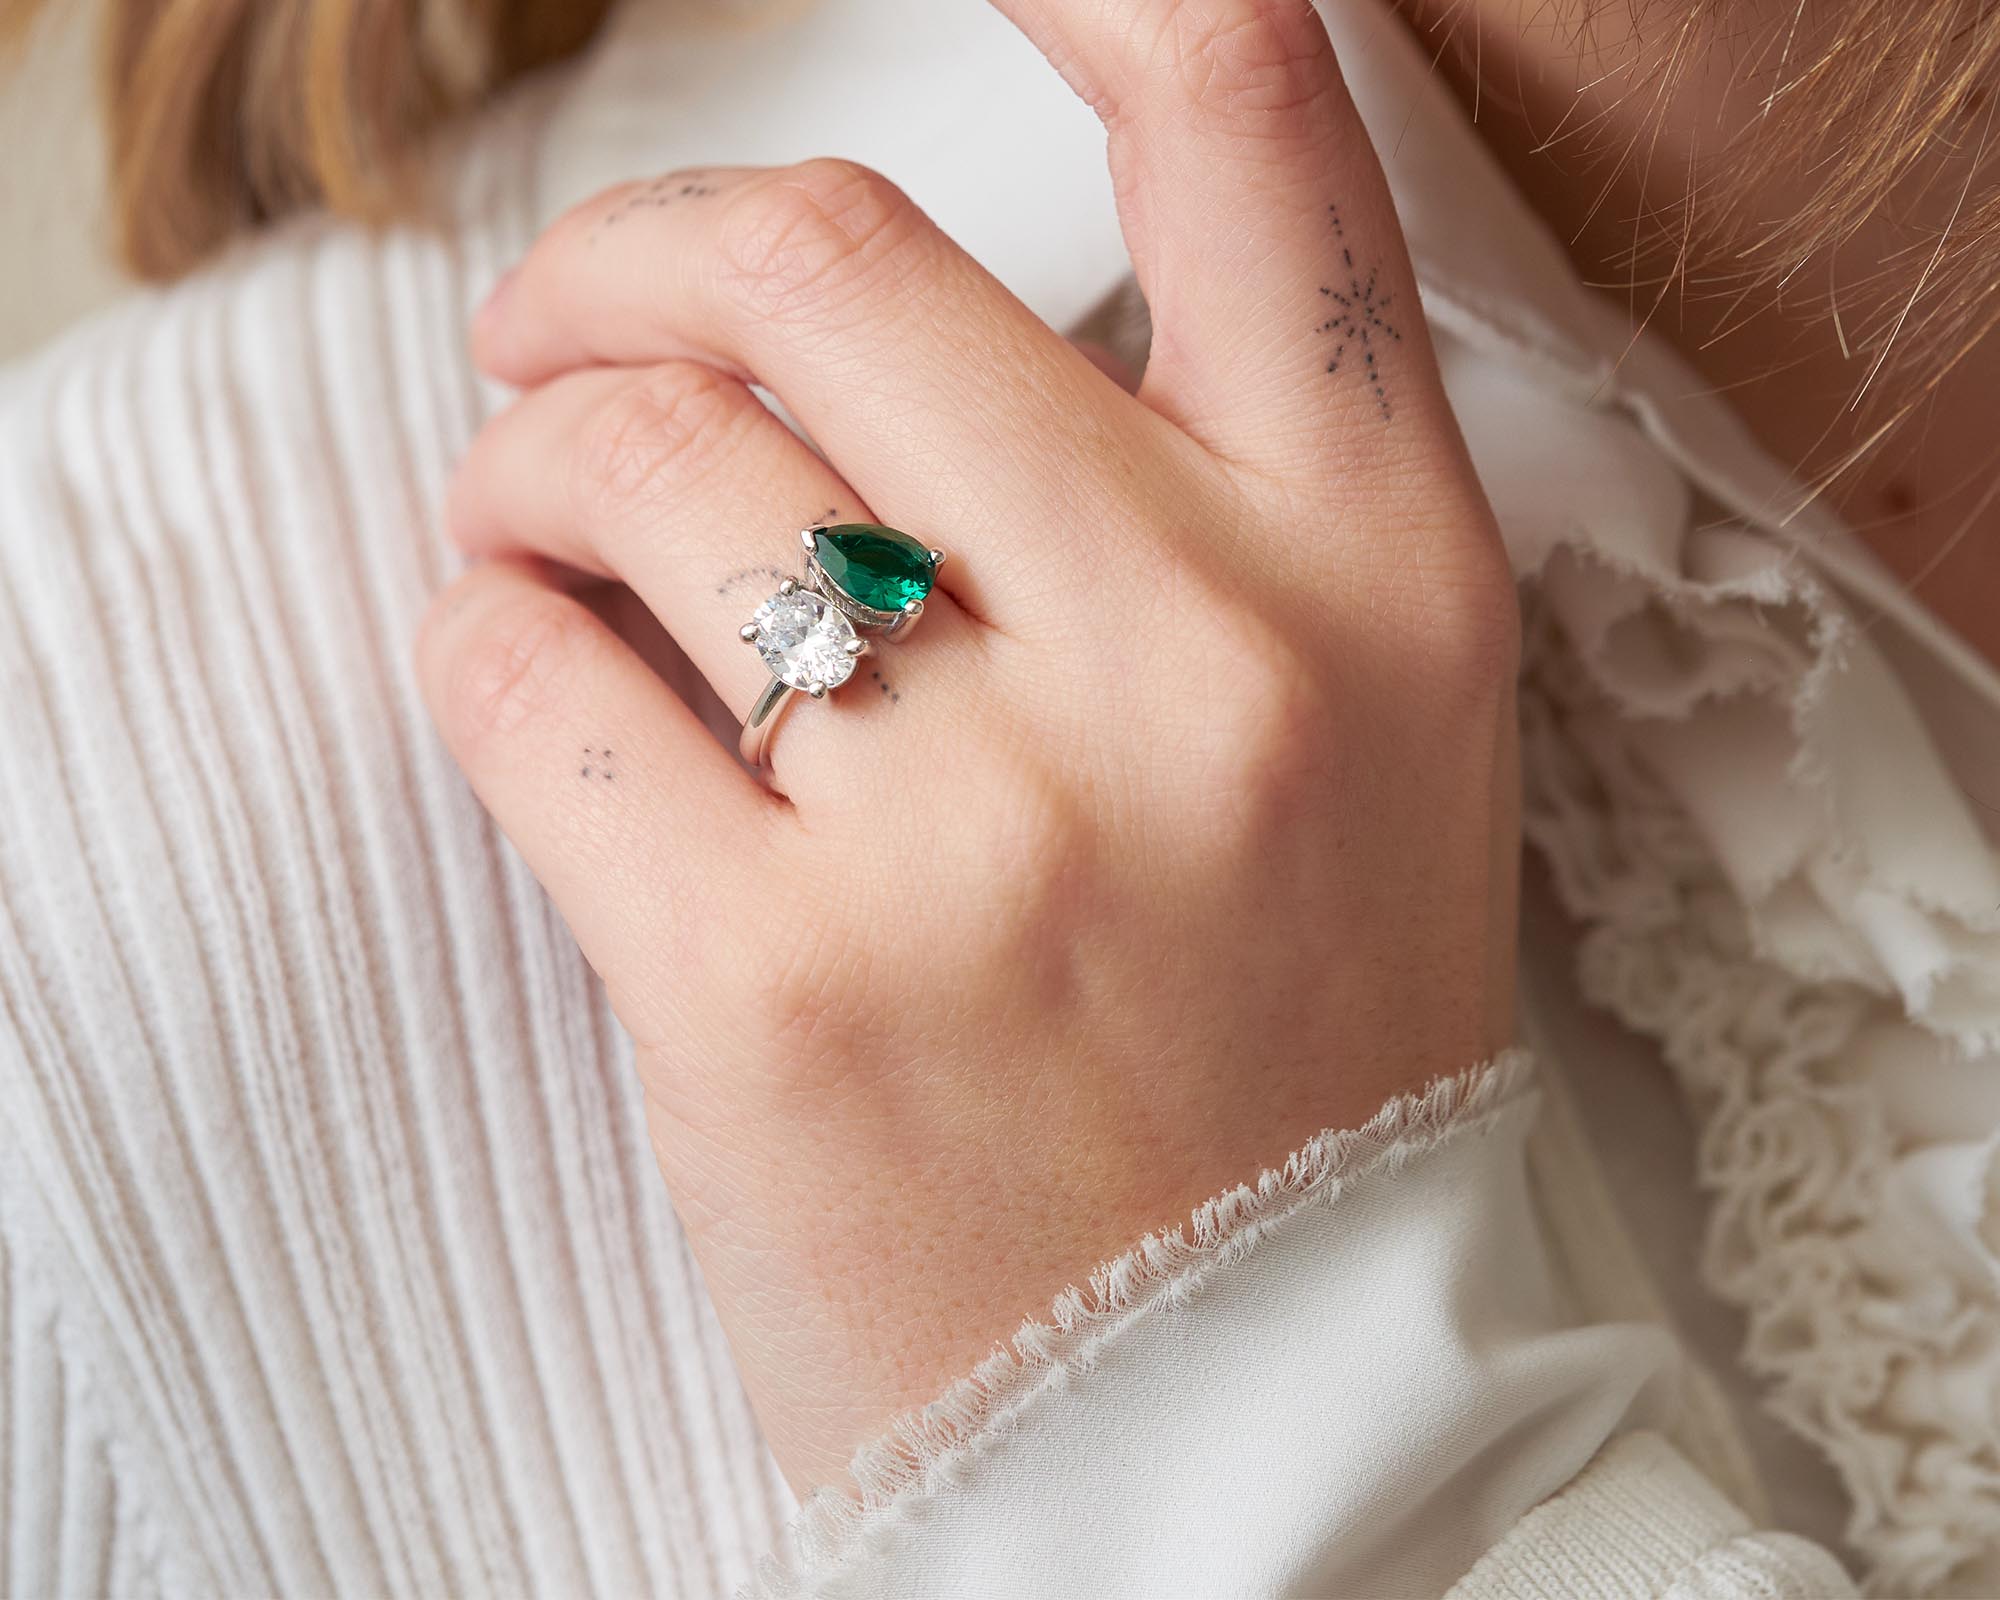 It's OK to Use an Emerald as an Engagement Ring? – Mark Broumand